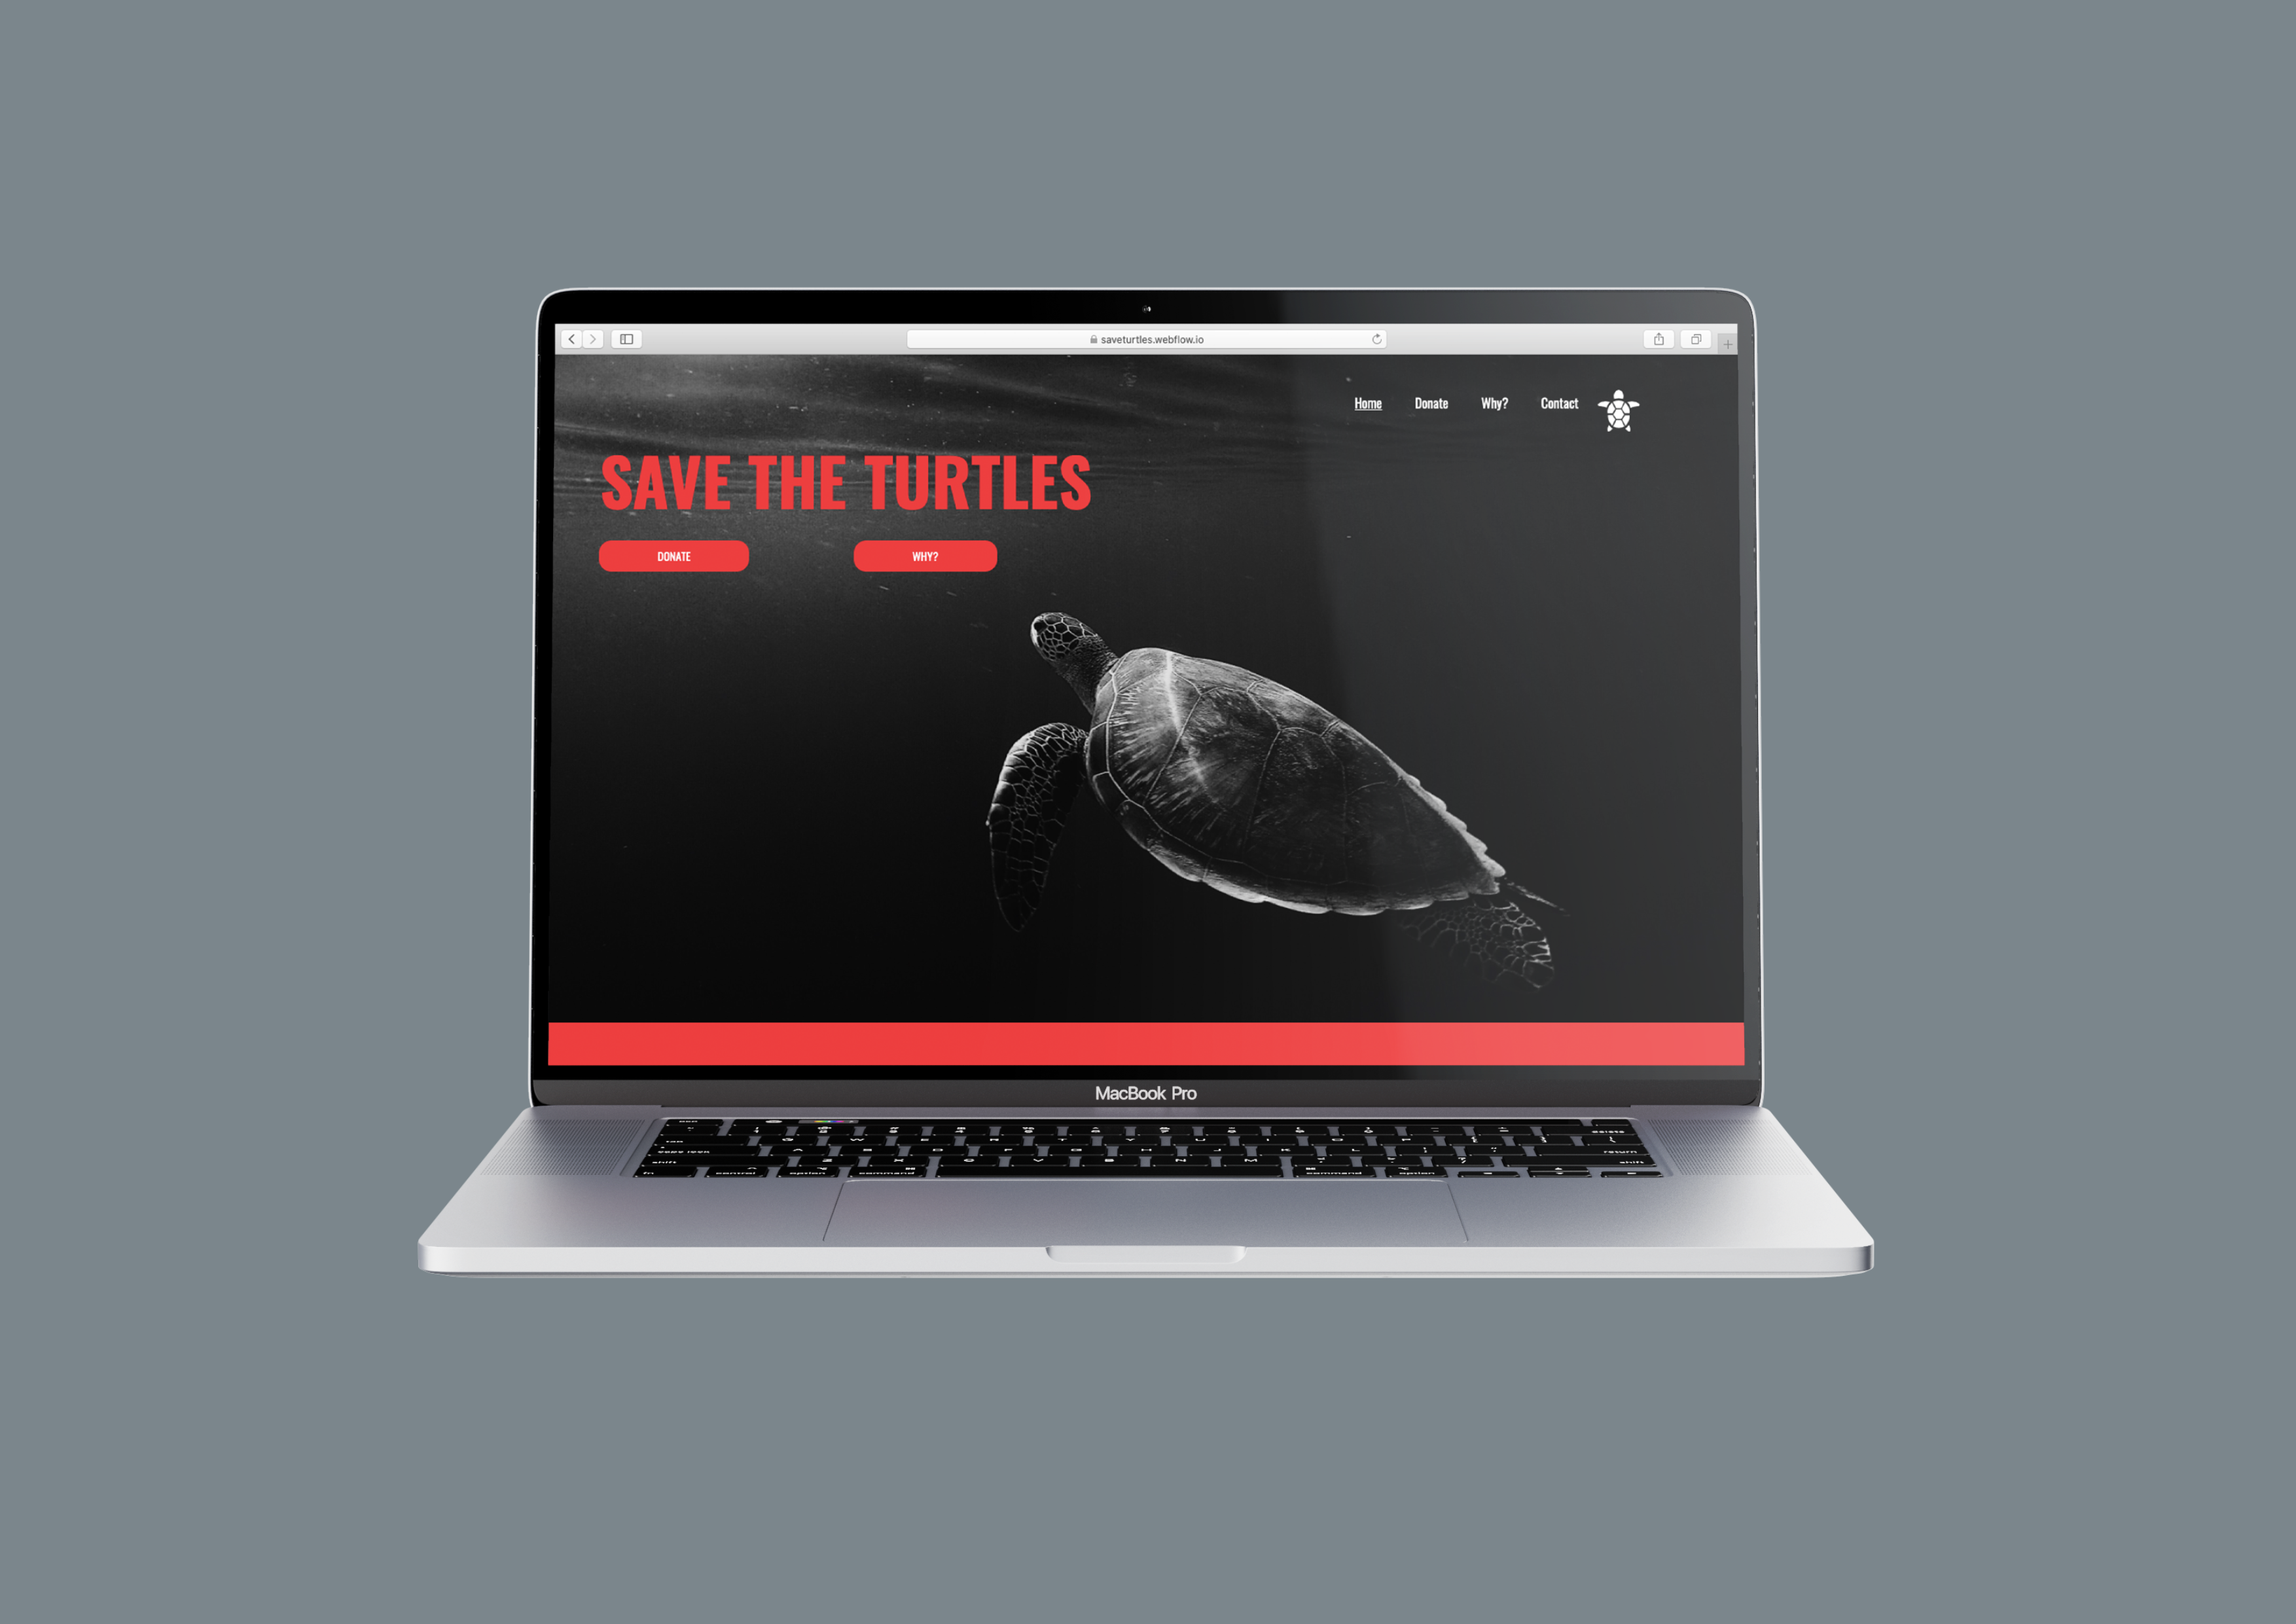 Save the turtles